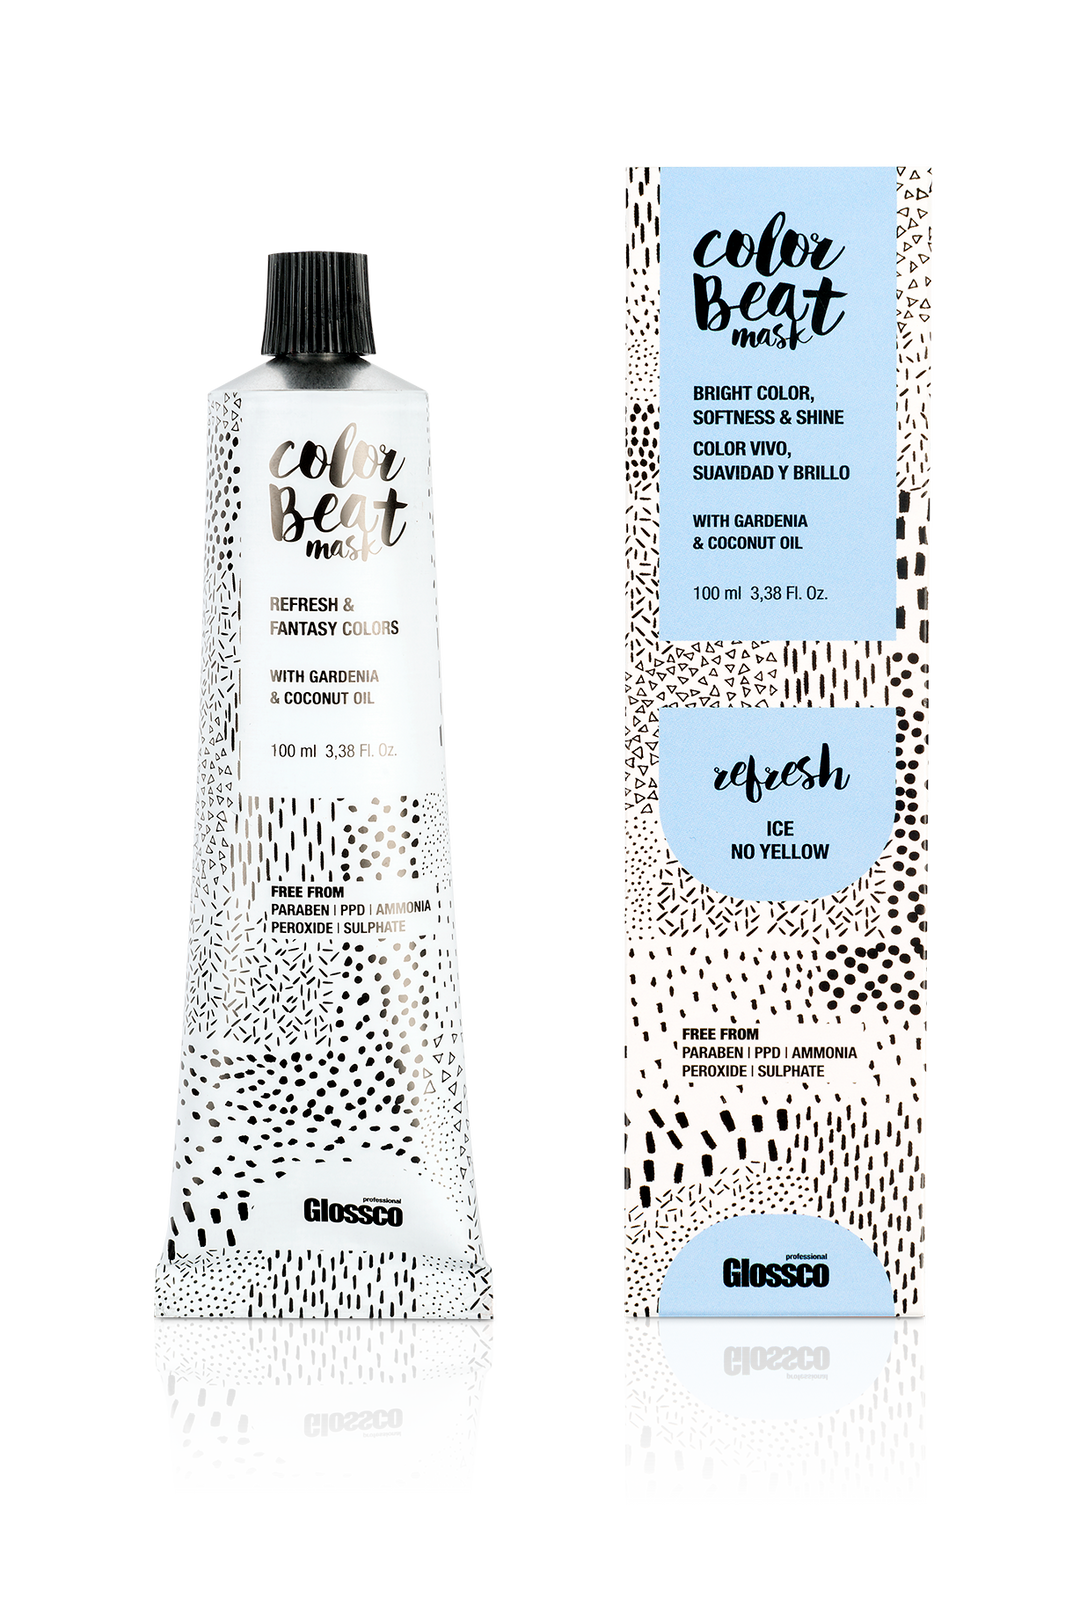 COLOR BEAT - REFRESH - 100 ml